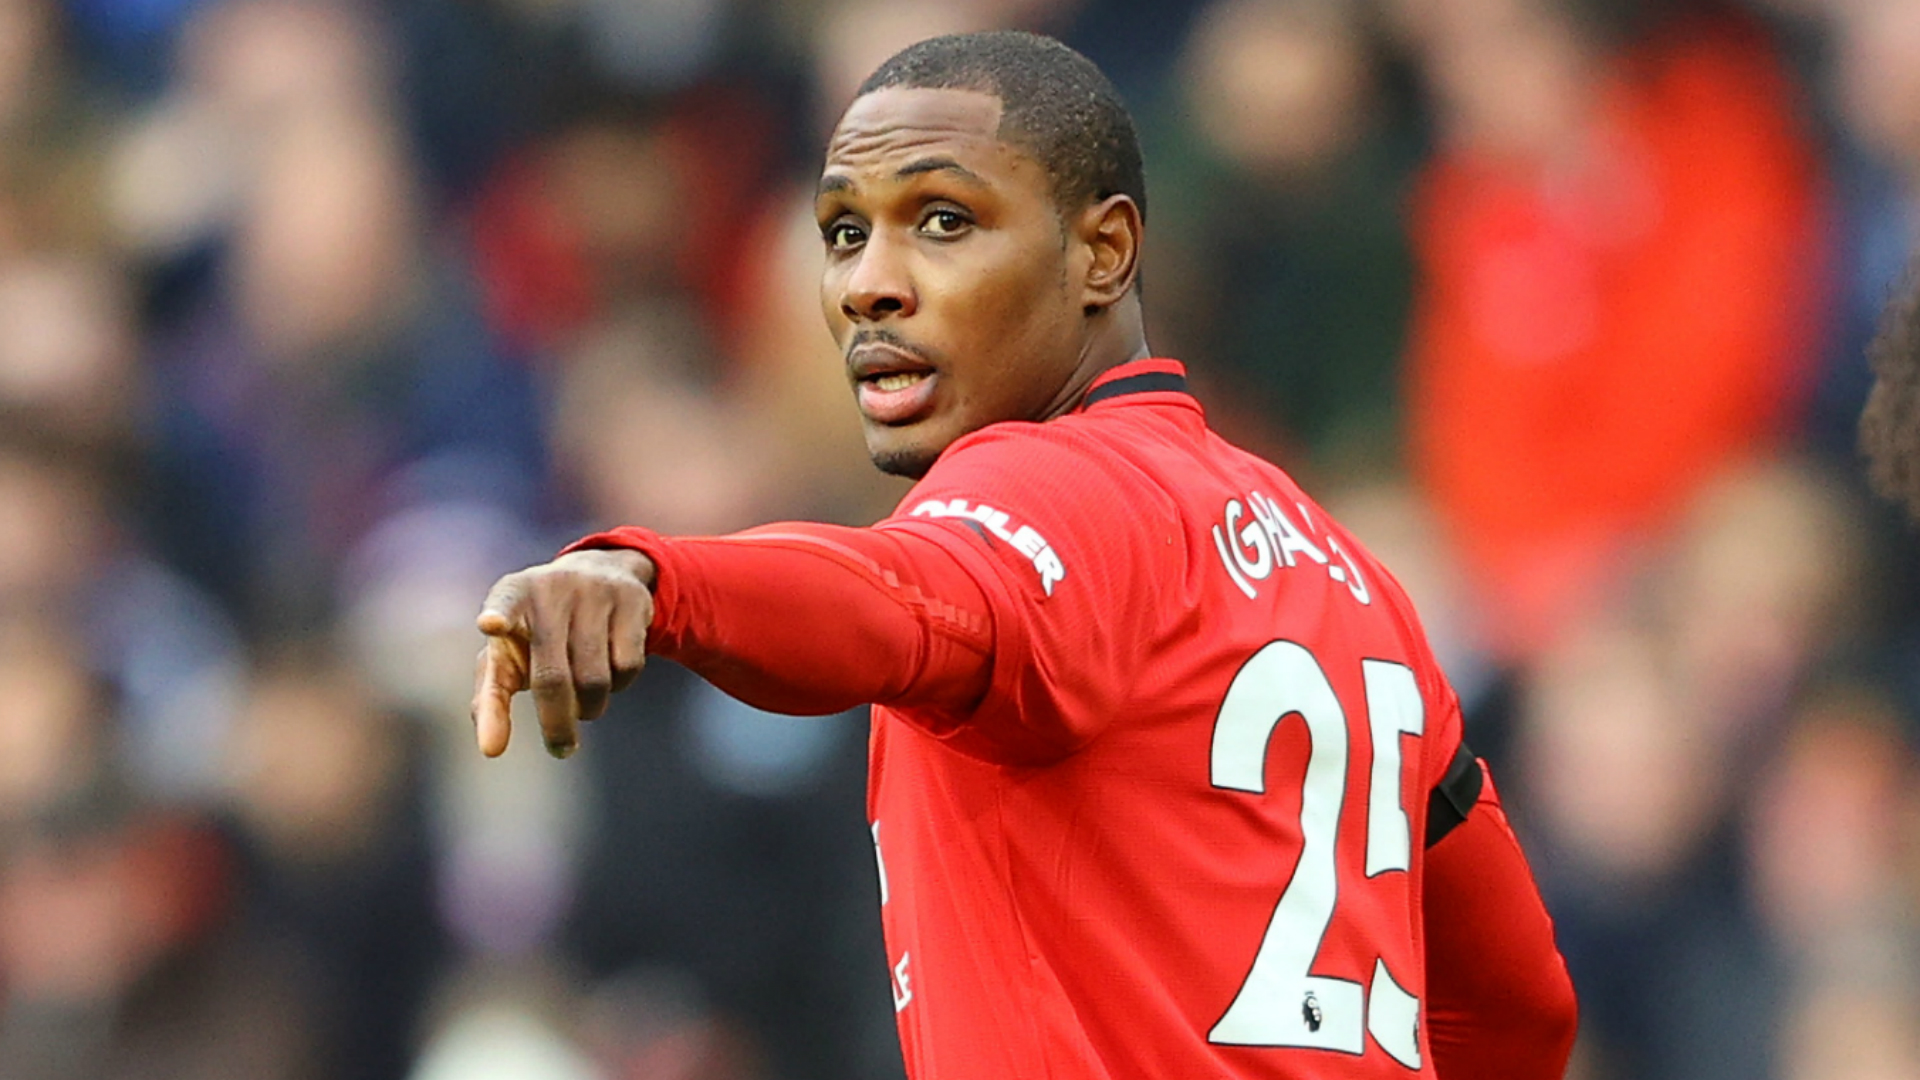 Ighalo aiming to lift Man Utd after loan extension